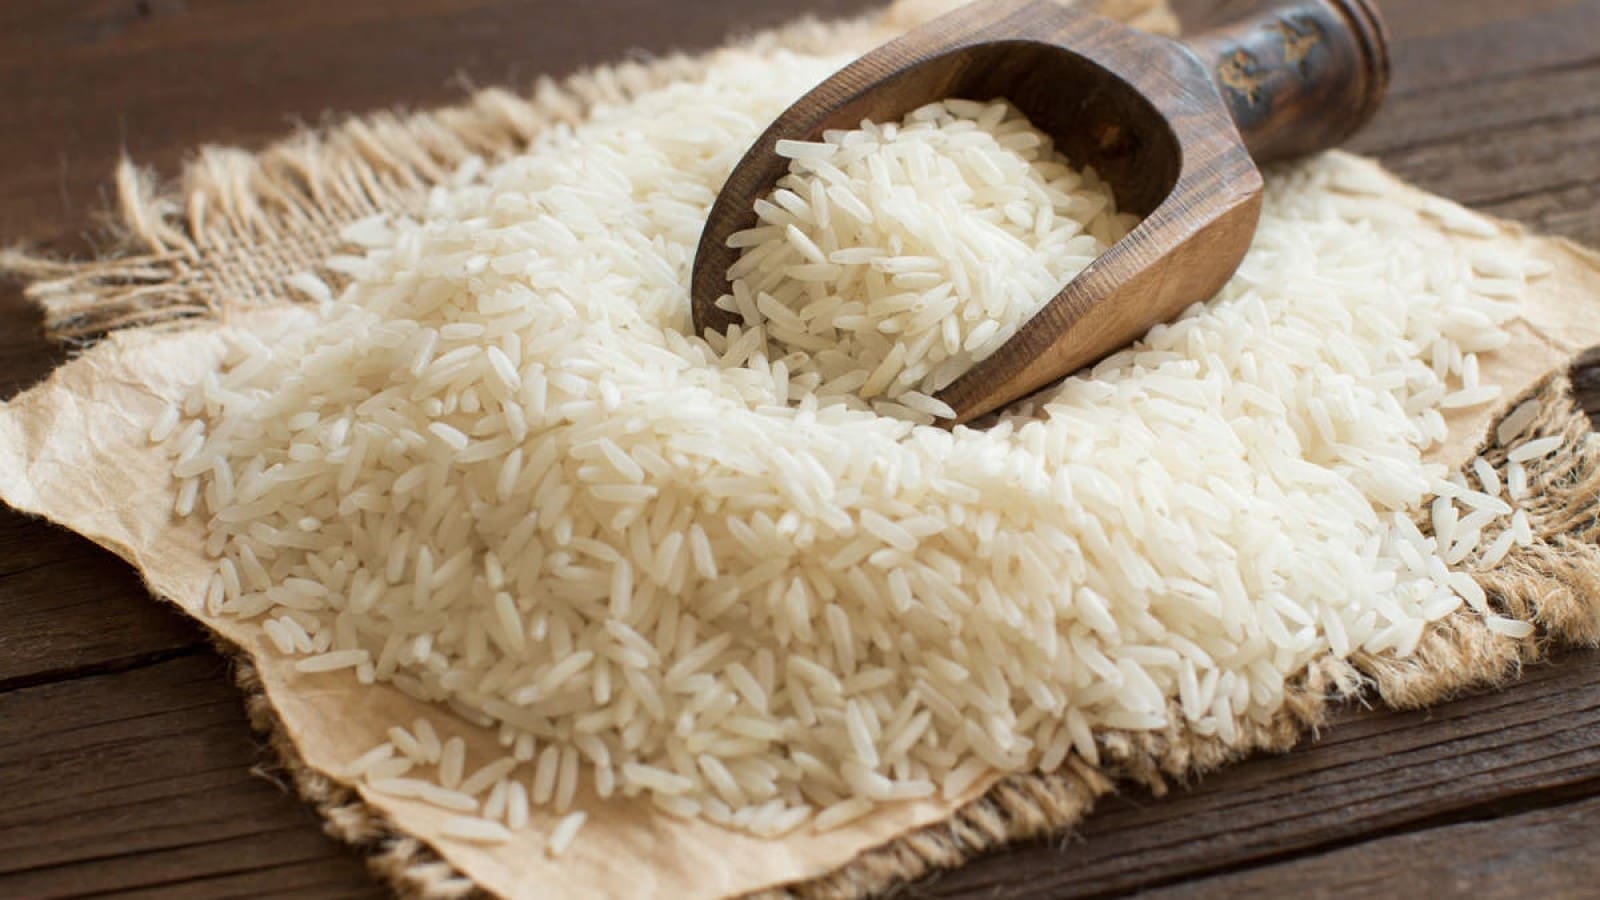 Philippines stretches tariff cuts on imported rice to mitigate inflation threats